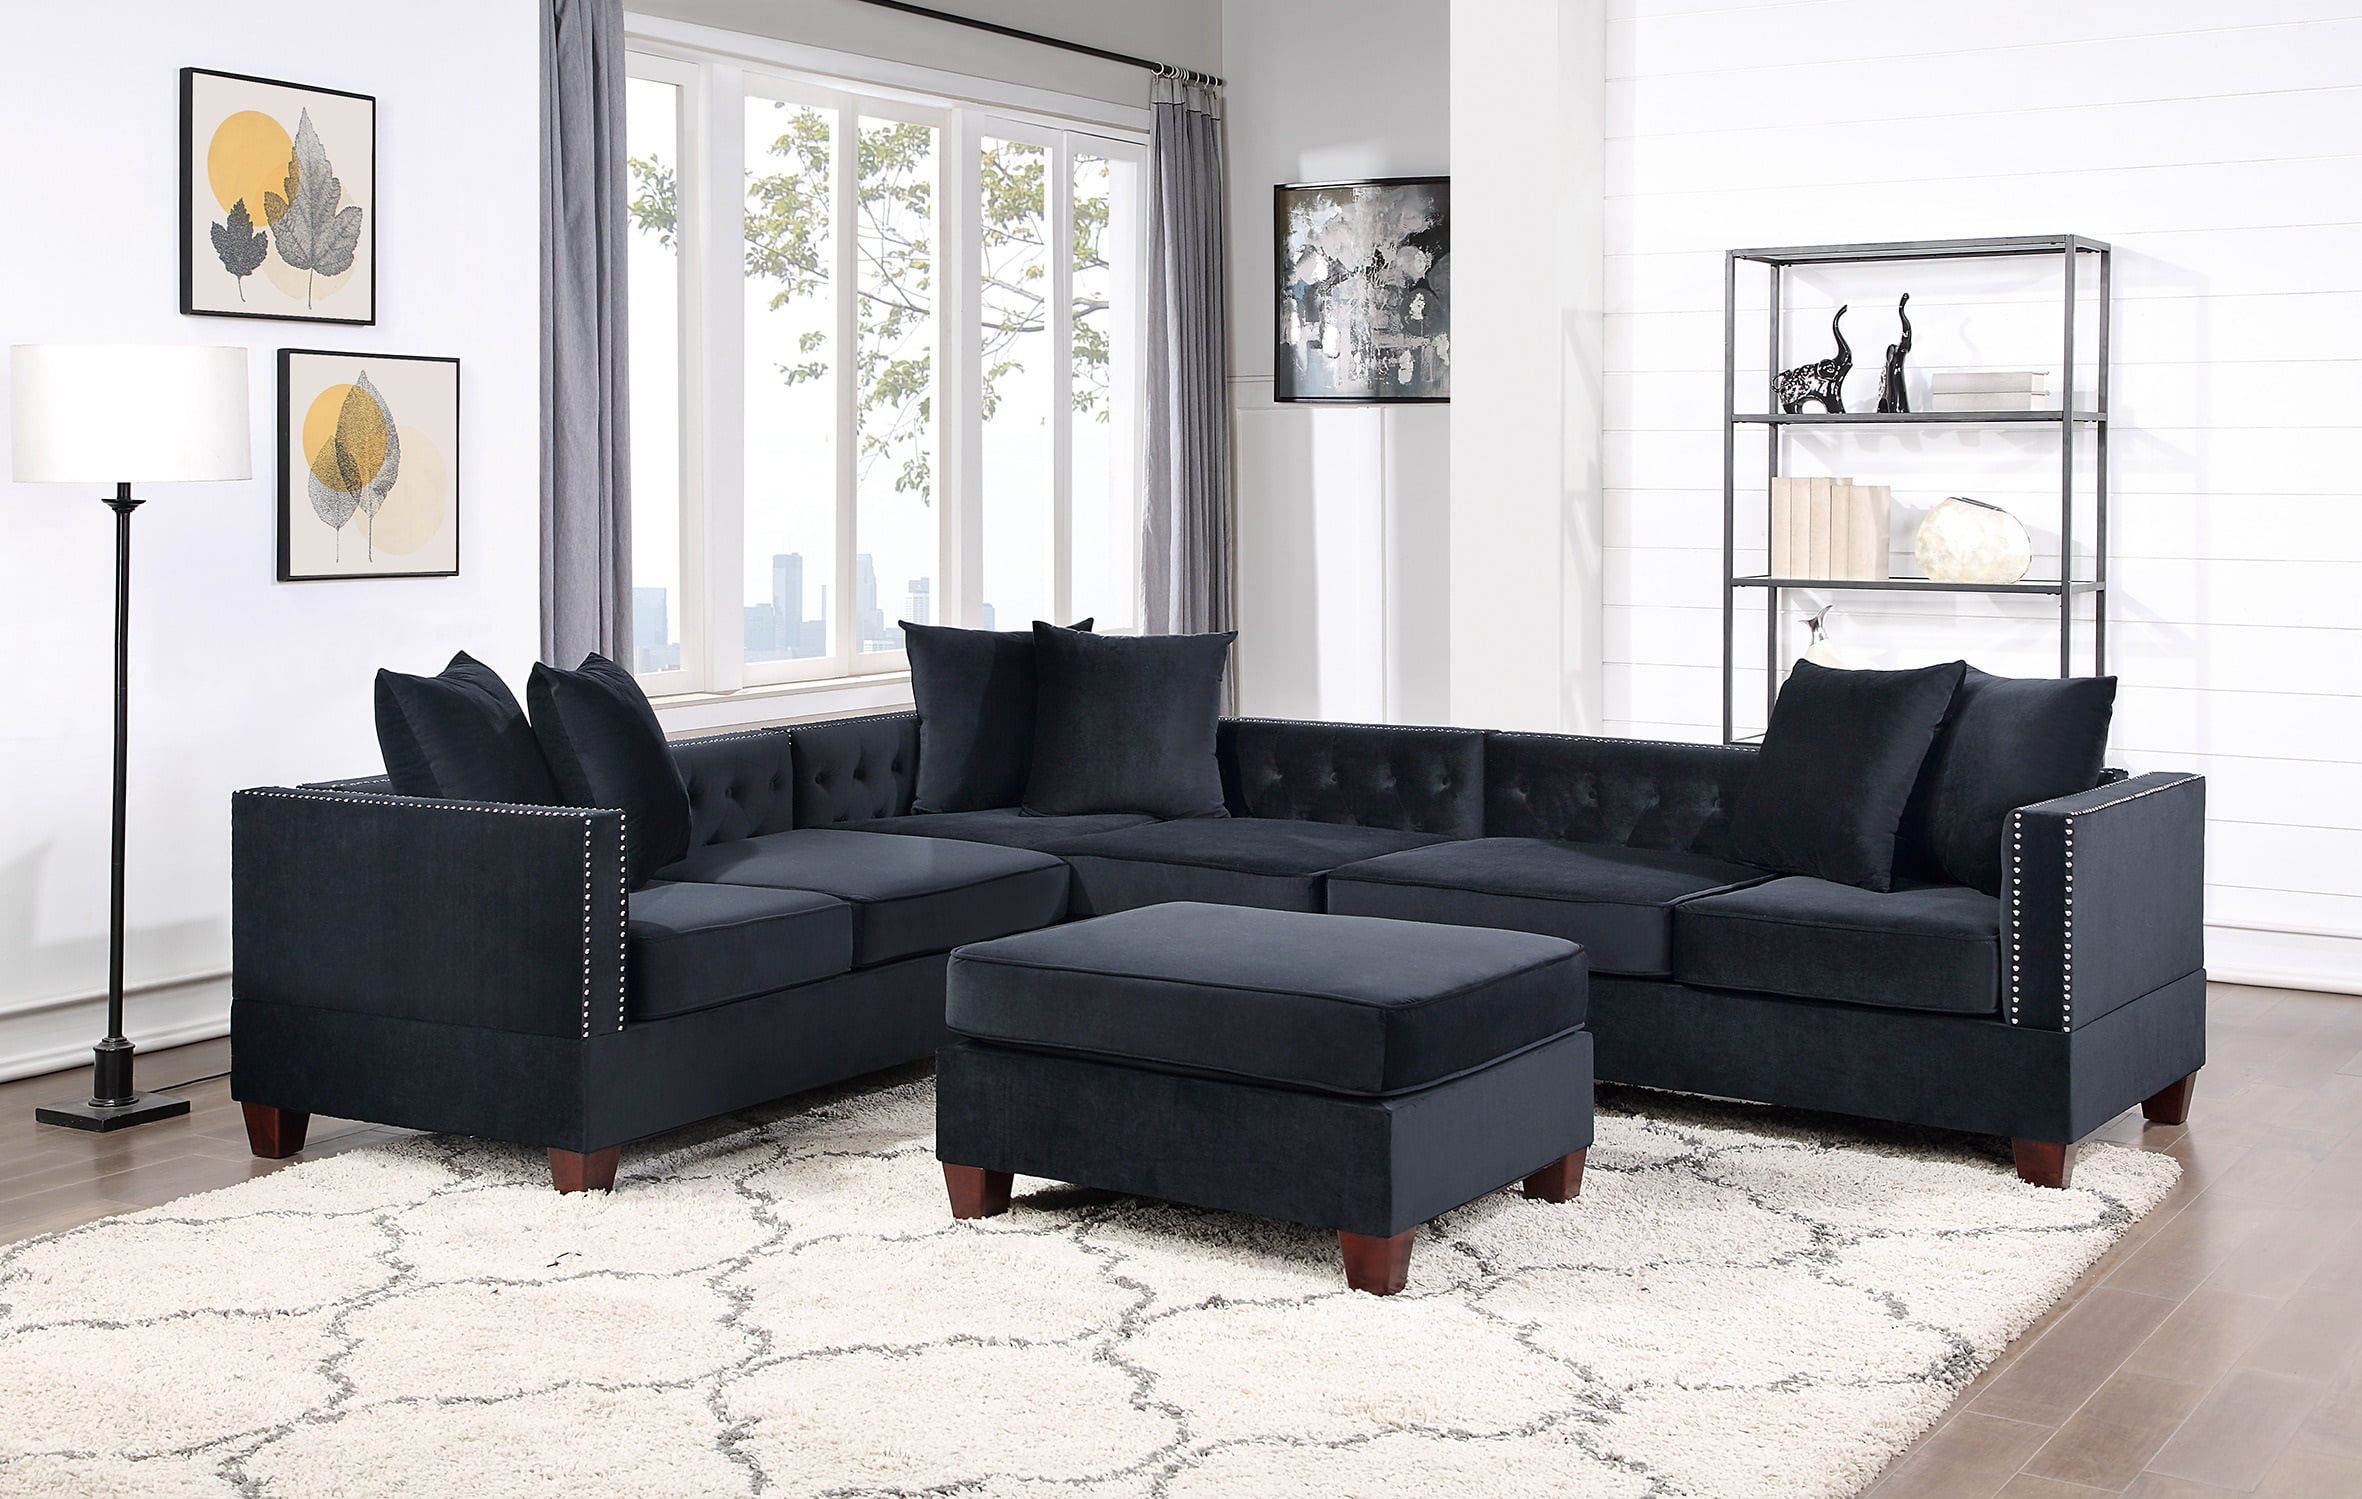 Black Velvet Fabric Solidwood Sectional 4Pc Set Reversible Chaise /  Loveseats Ottoman Tufted Cushion Couch Pillows Living Room – Walmart Regarding Sectional Sofas With Ottomans And Tufted Back Cushion (View 3 of 15)